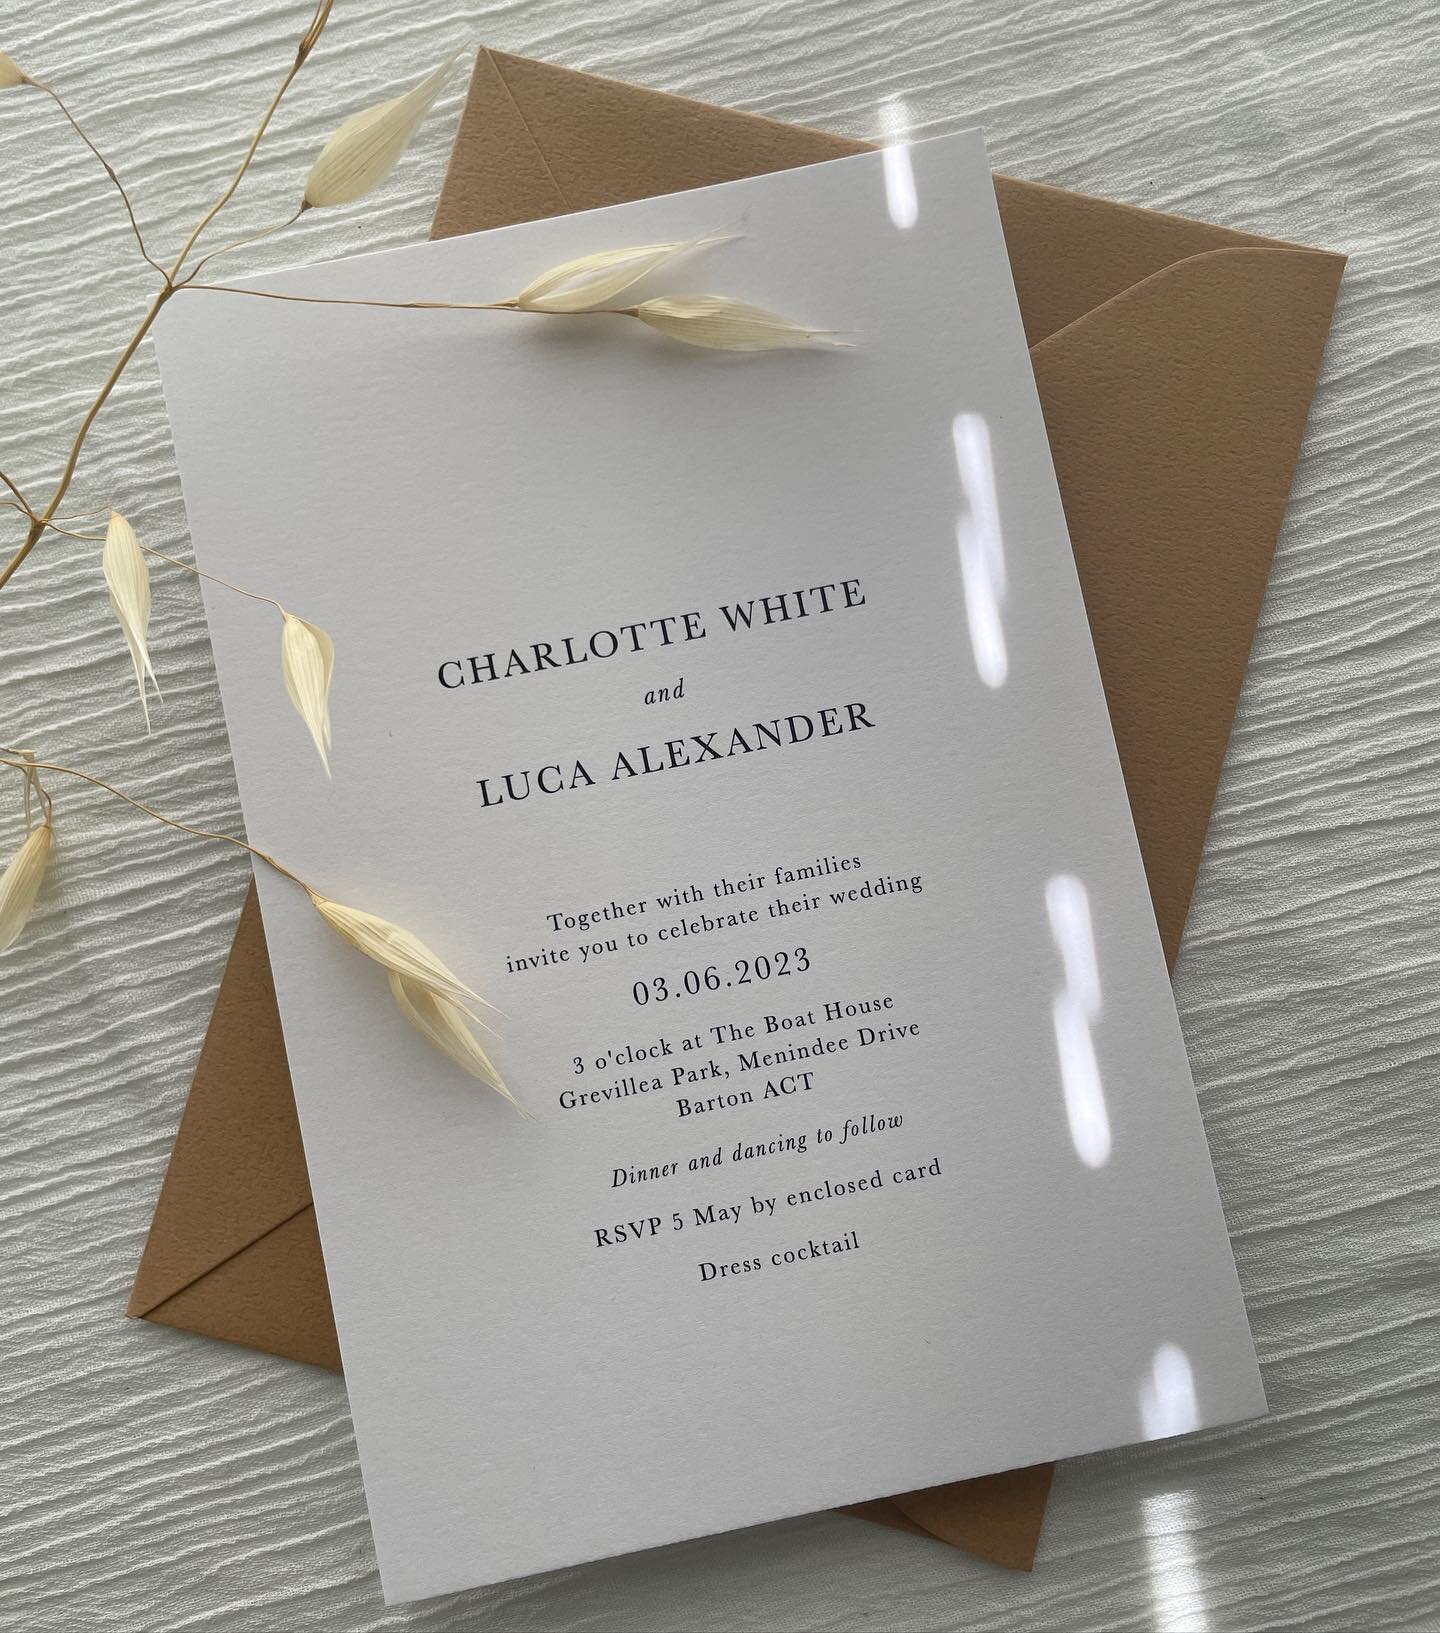 Our Cotswolds invitation for C + L 🤍. 
Invitation on white card with a gorgeous cinnamon envelope. 
.
.
.
.
.
.
#weddinginvitations #bride #graphicdesign #weddinginvite #Weddingday #invite #invitation #weddinginvitation #Weddinginspiration #weddings